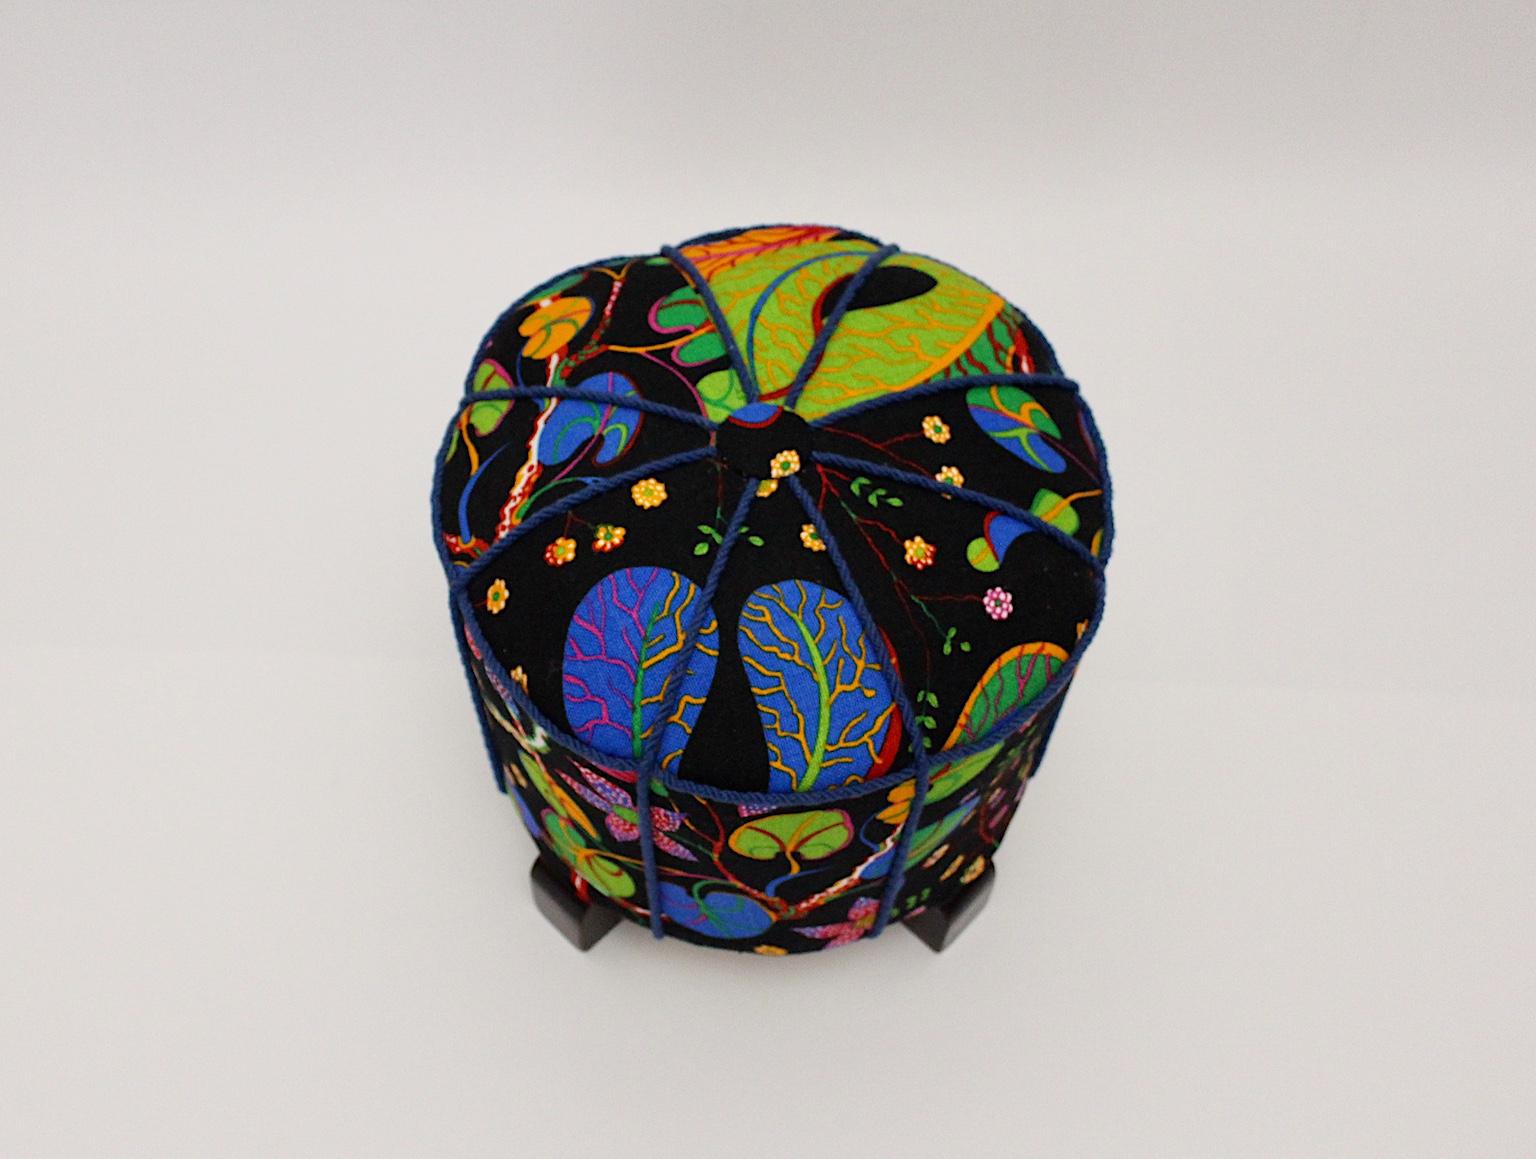 Art Deco Vintage Beech Pouf or Stool with Josef Frank Fabric, 1930s, Austria For Sale 3